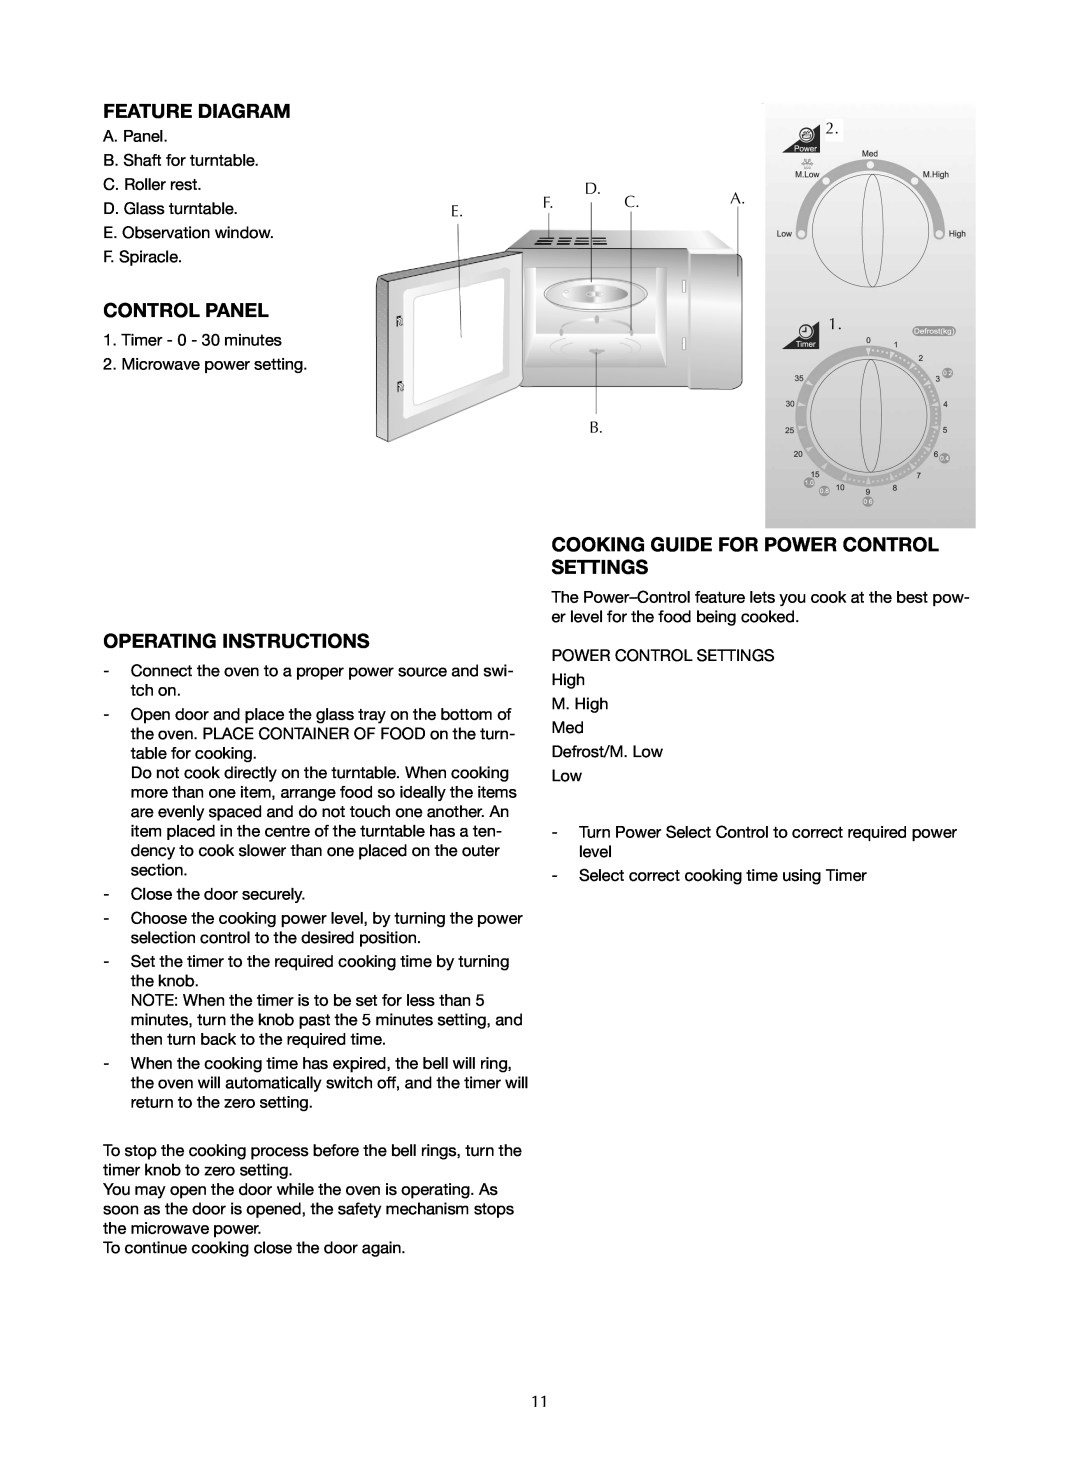 Ide Line 753-122 manual Feature Diagram, Control Panel, Operating Instructions, Cooking Guide For Power Control Settings 